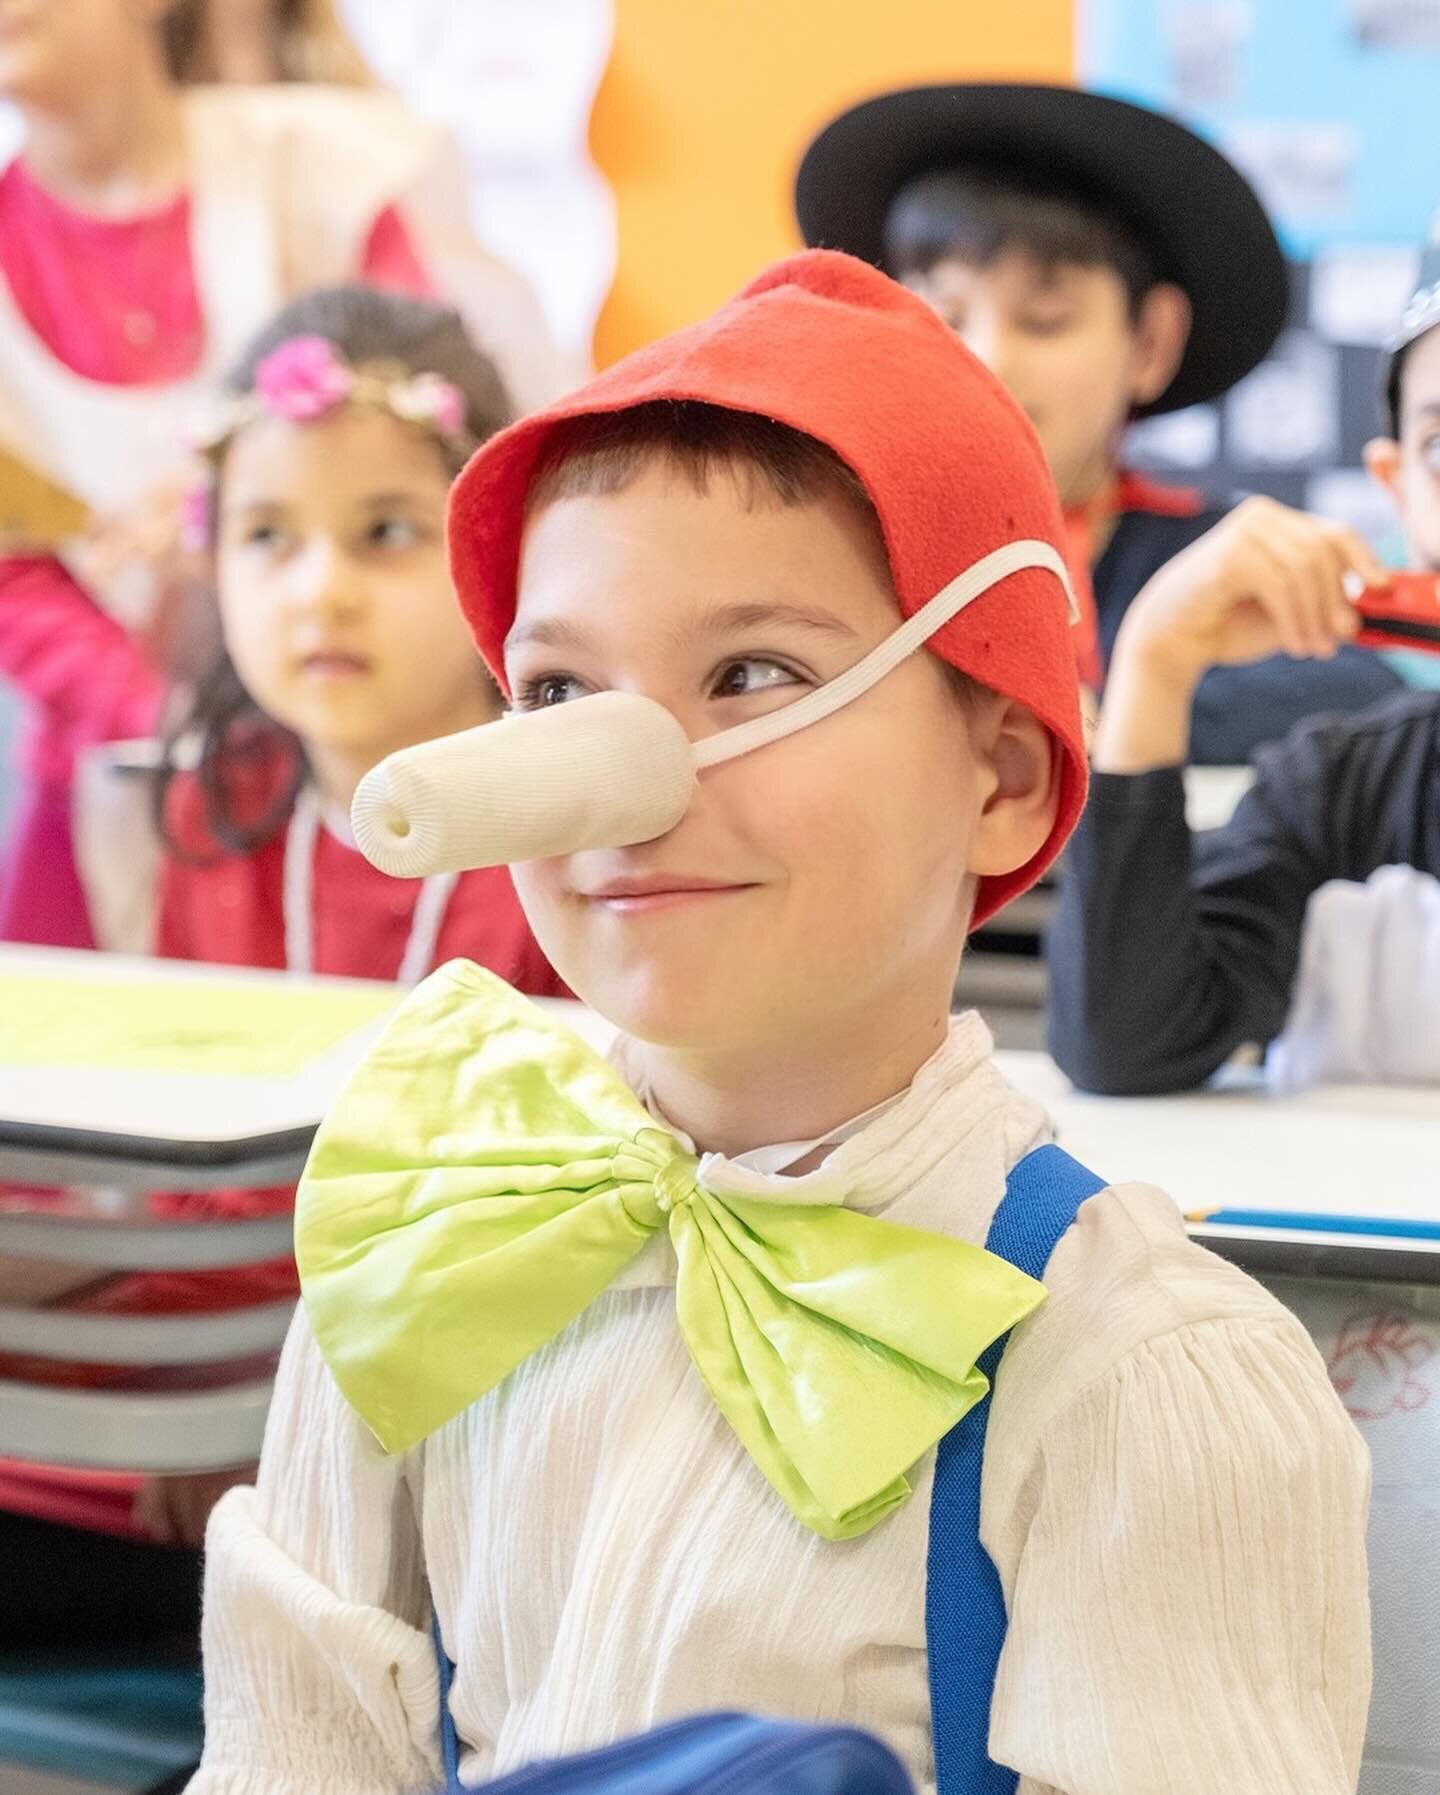 Have you ever seen all the fairy tale characters in one place? We didn&rsquo;t think so! On Tell A Fairy Tale Day, Eraslan students dressed up as their favorite fictional character and enjoyed a happily ever after kind of day. #TellAFairyTaleDay

Hay